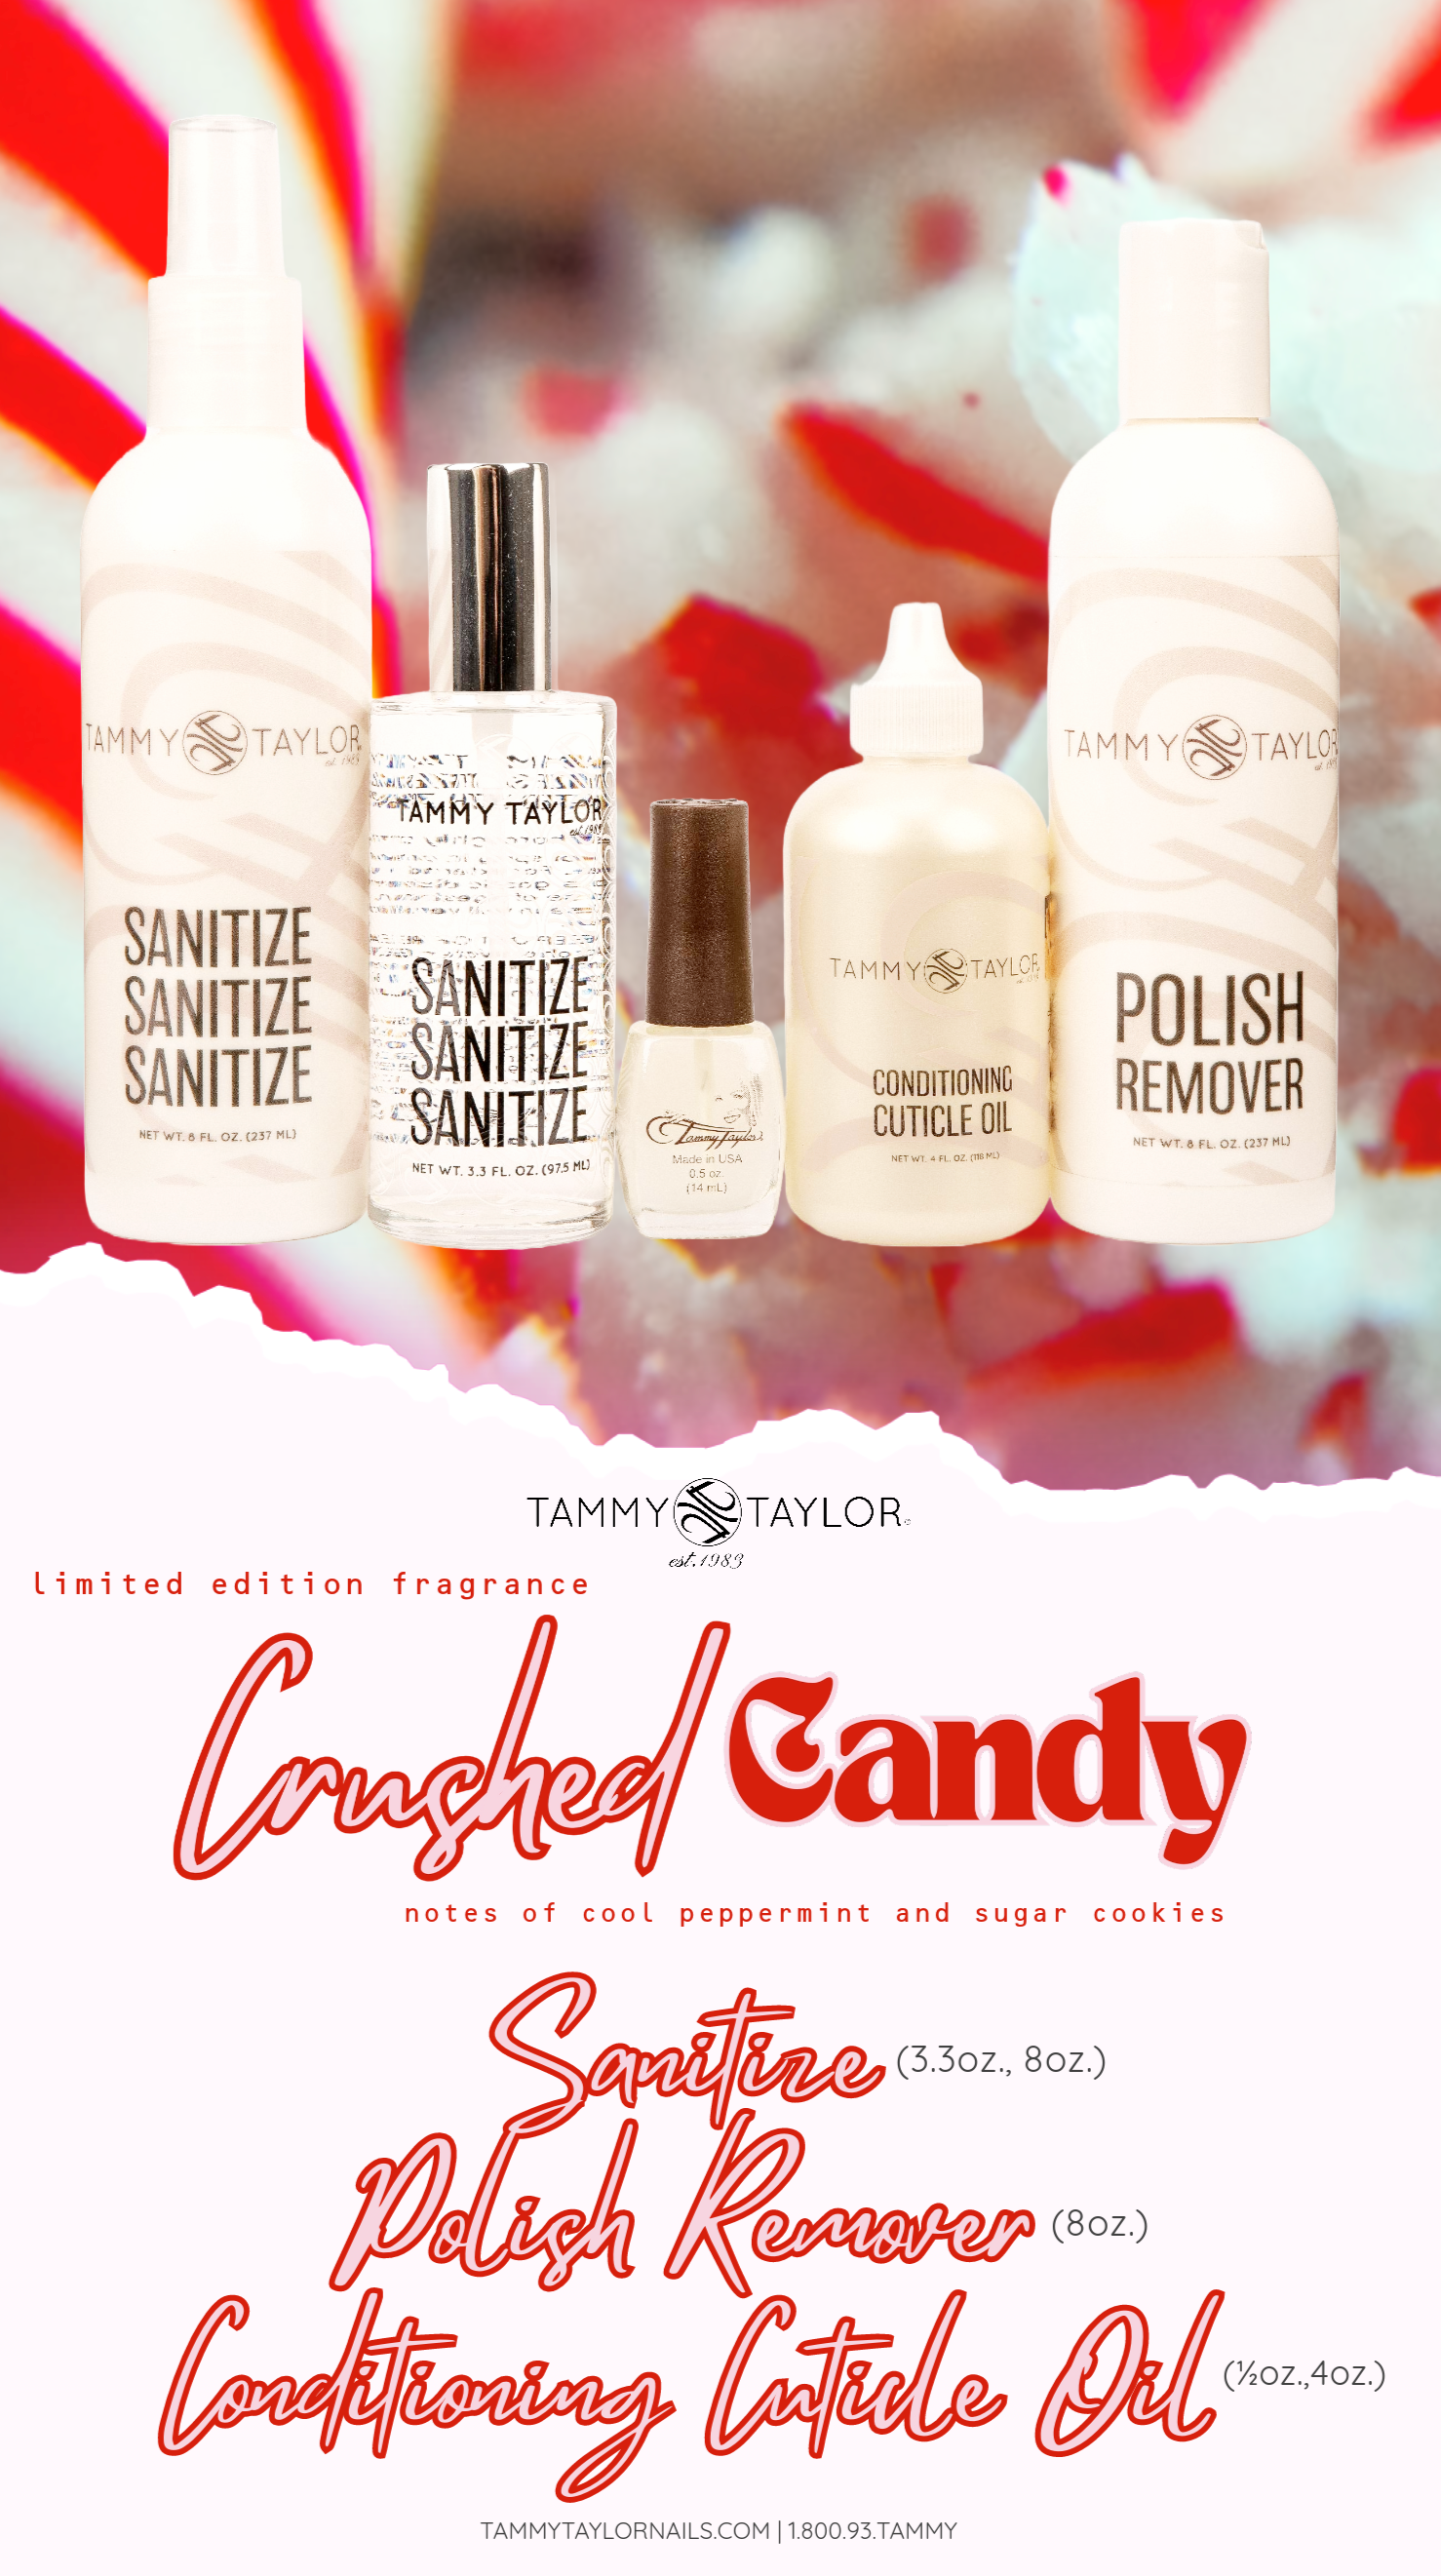 Crushed Candy Glass Spray Sanitize